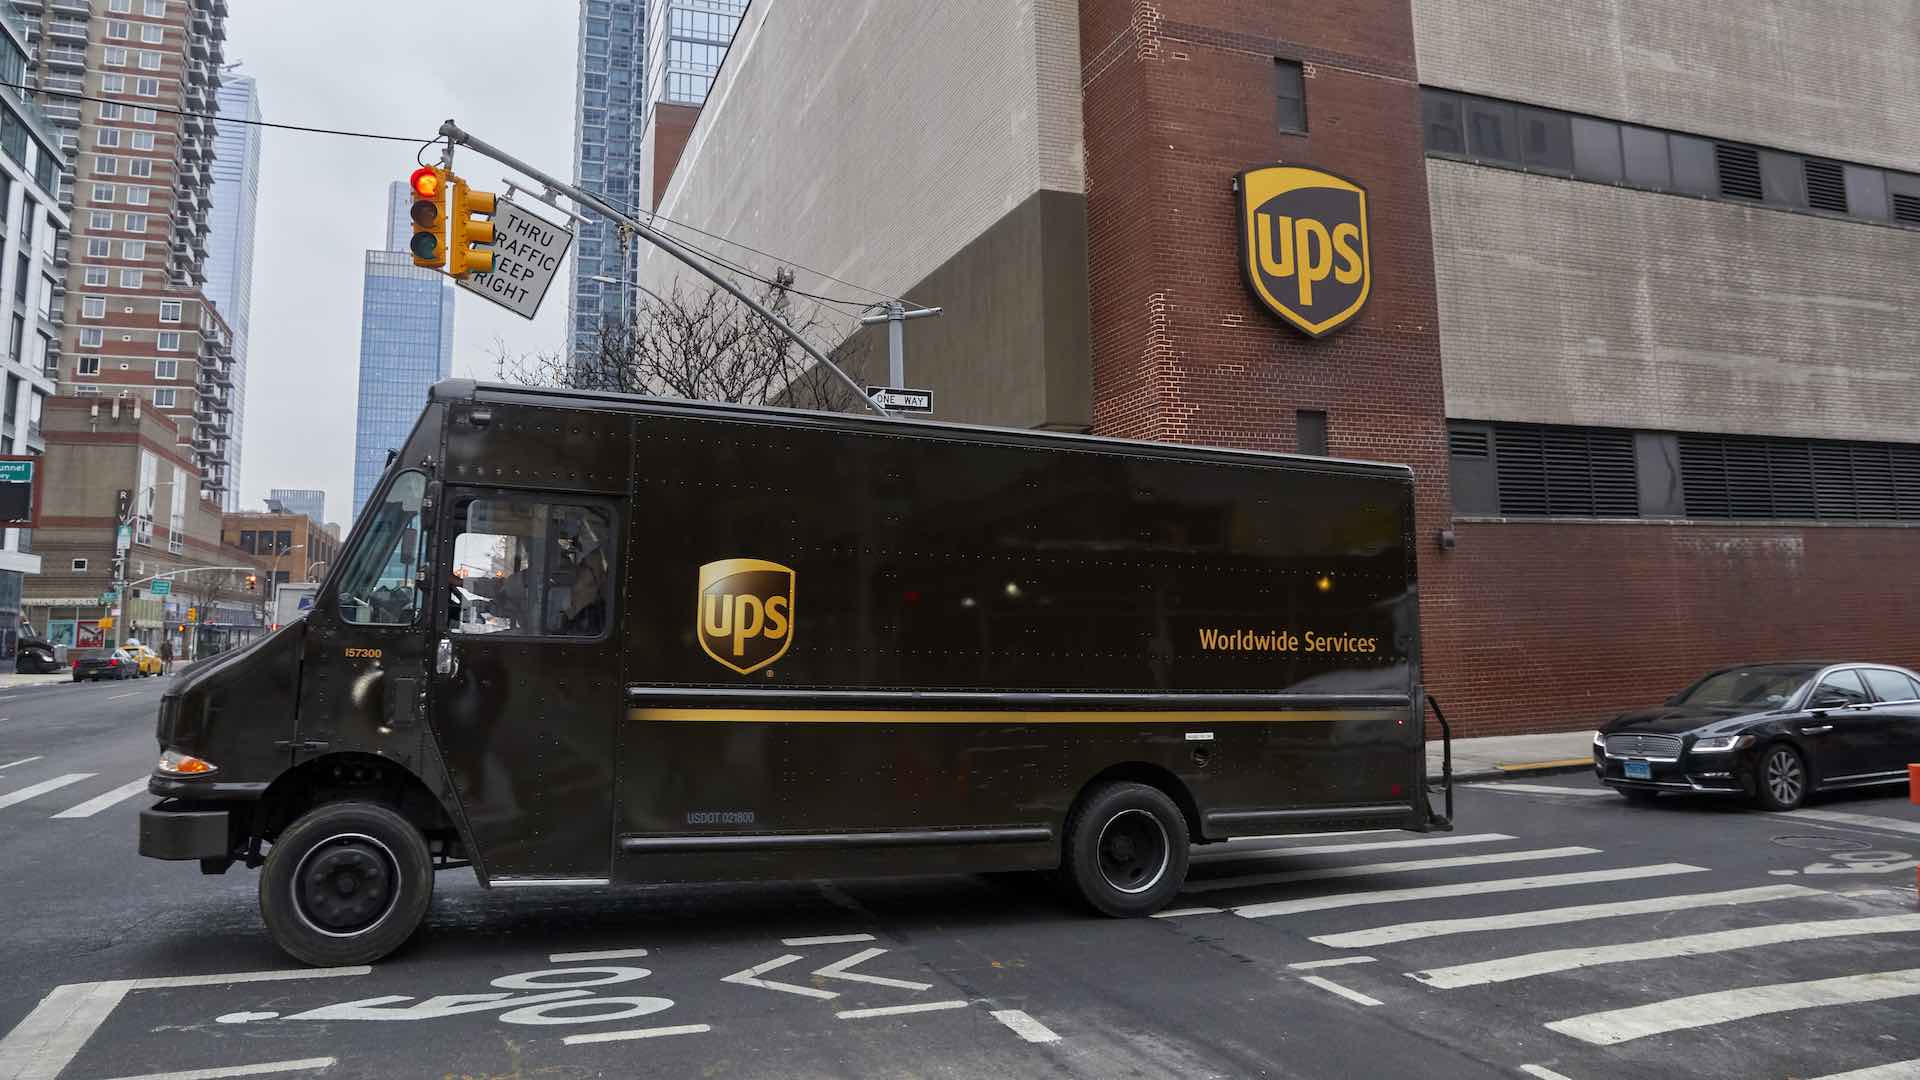 UPS reports disappointing Q4 earnings and reveals 12,000 job cuts